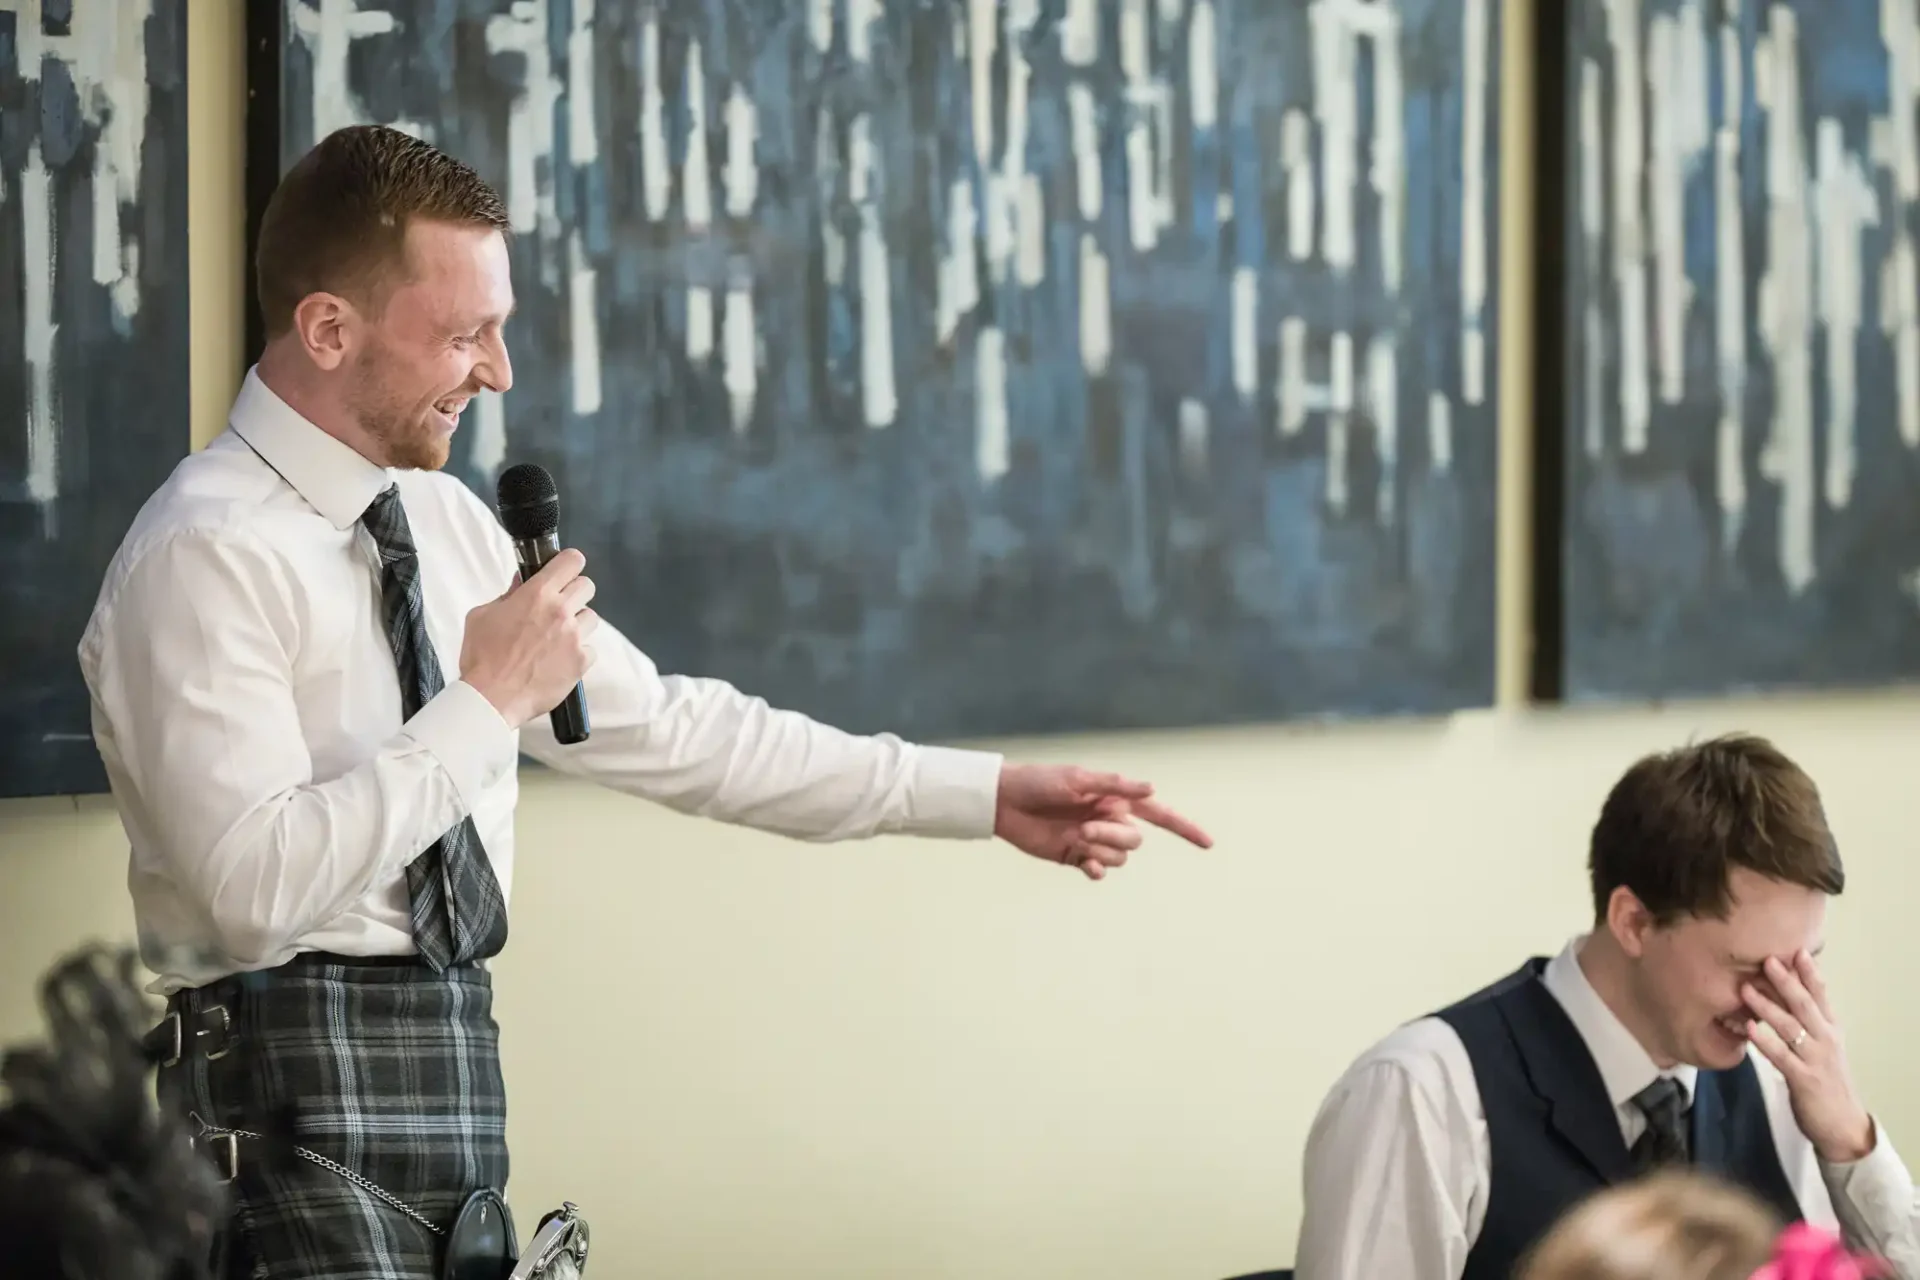 Man in plaid trousers and vest speaks into a microphone, gesturing towards another man who is laughing, in a room with abstract art on the wall.